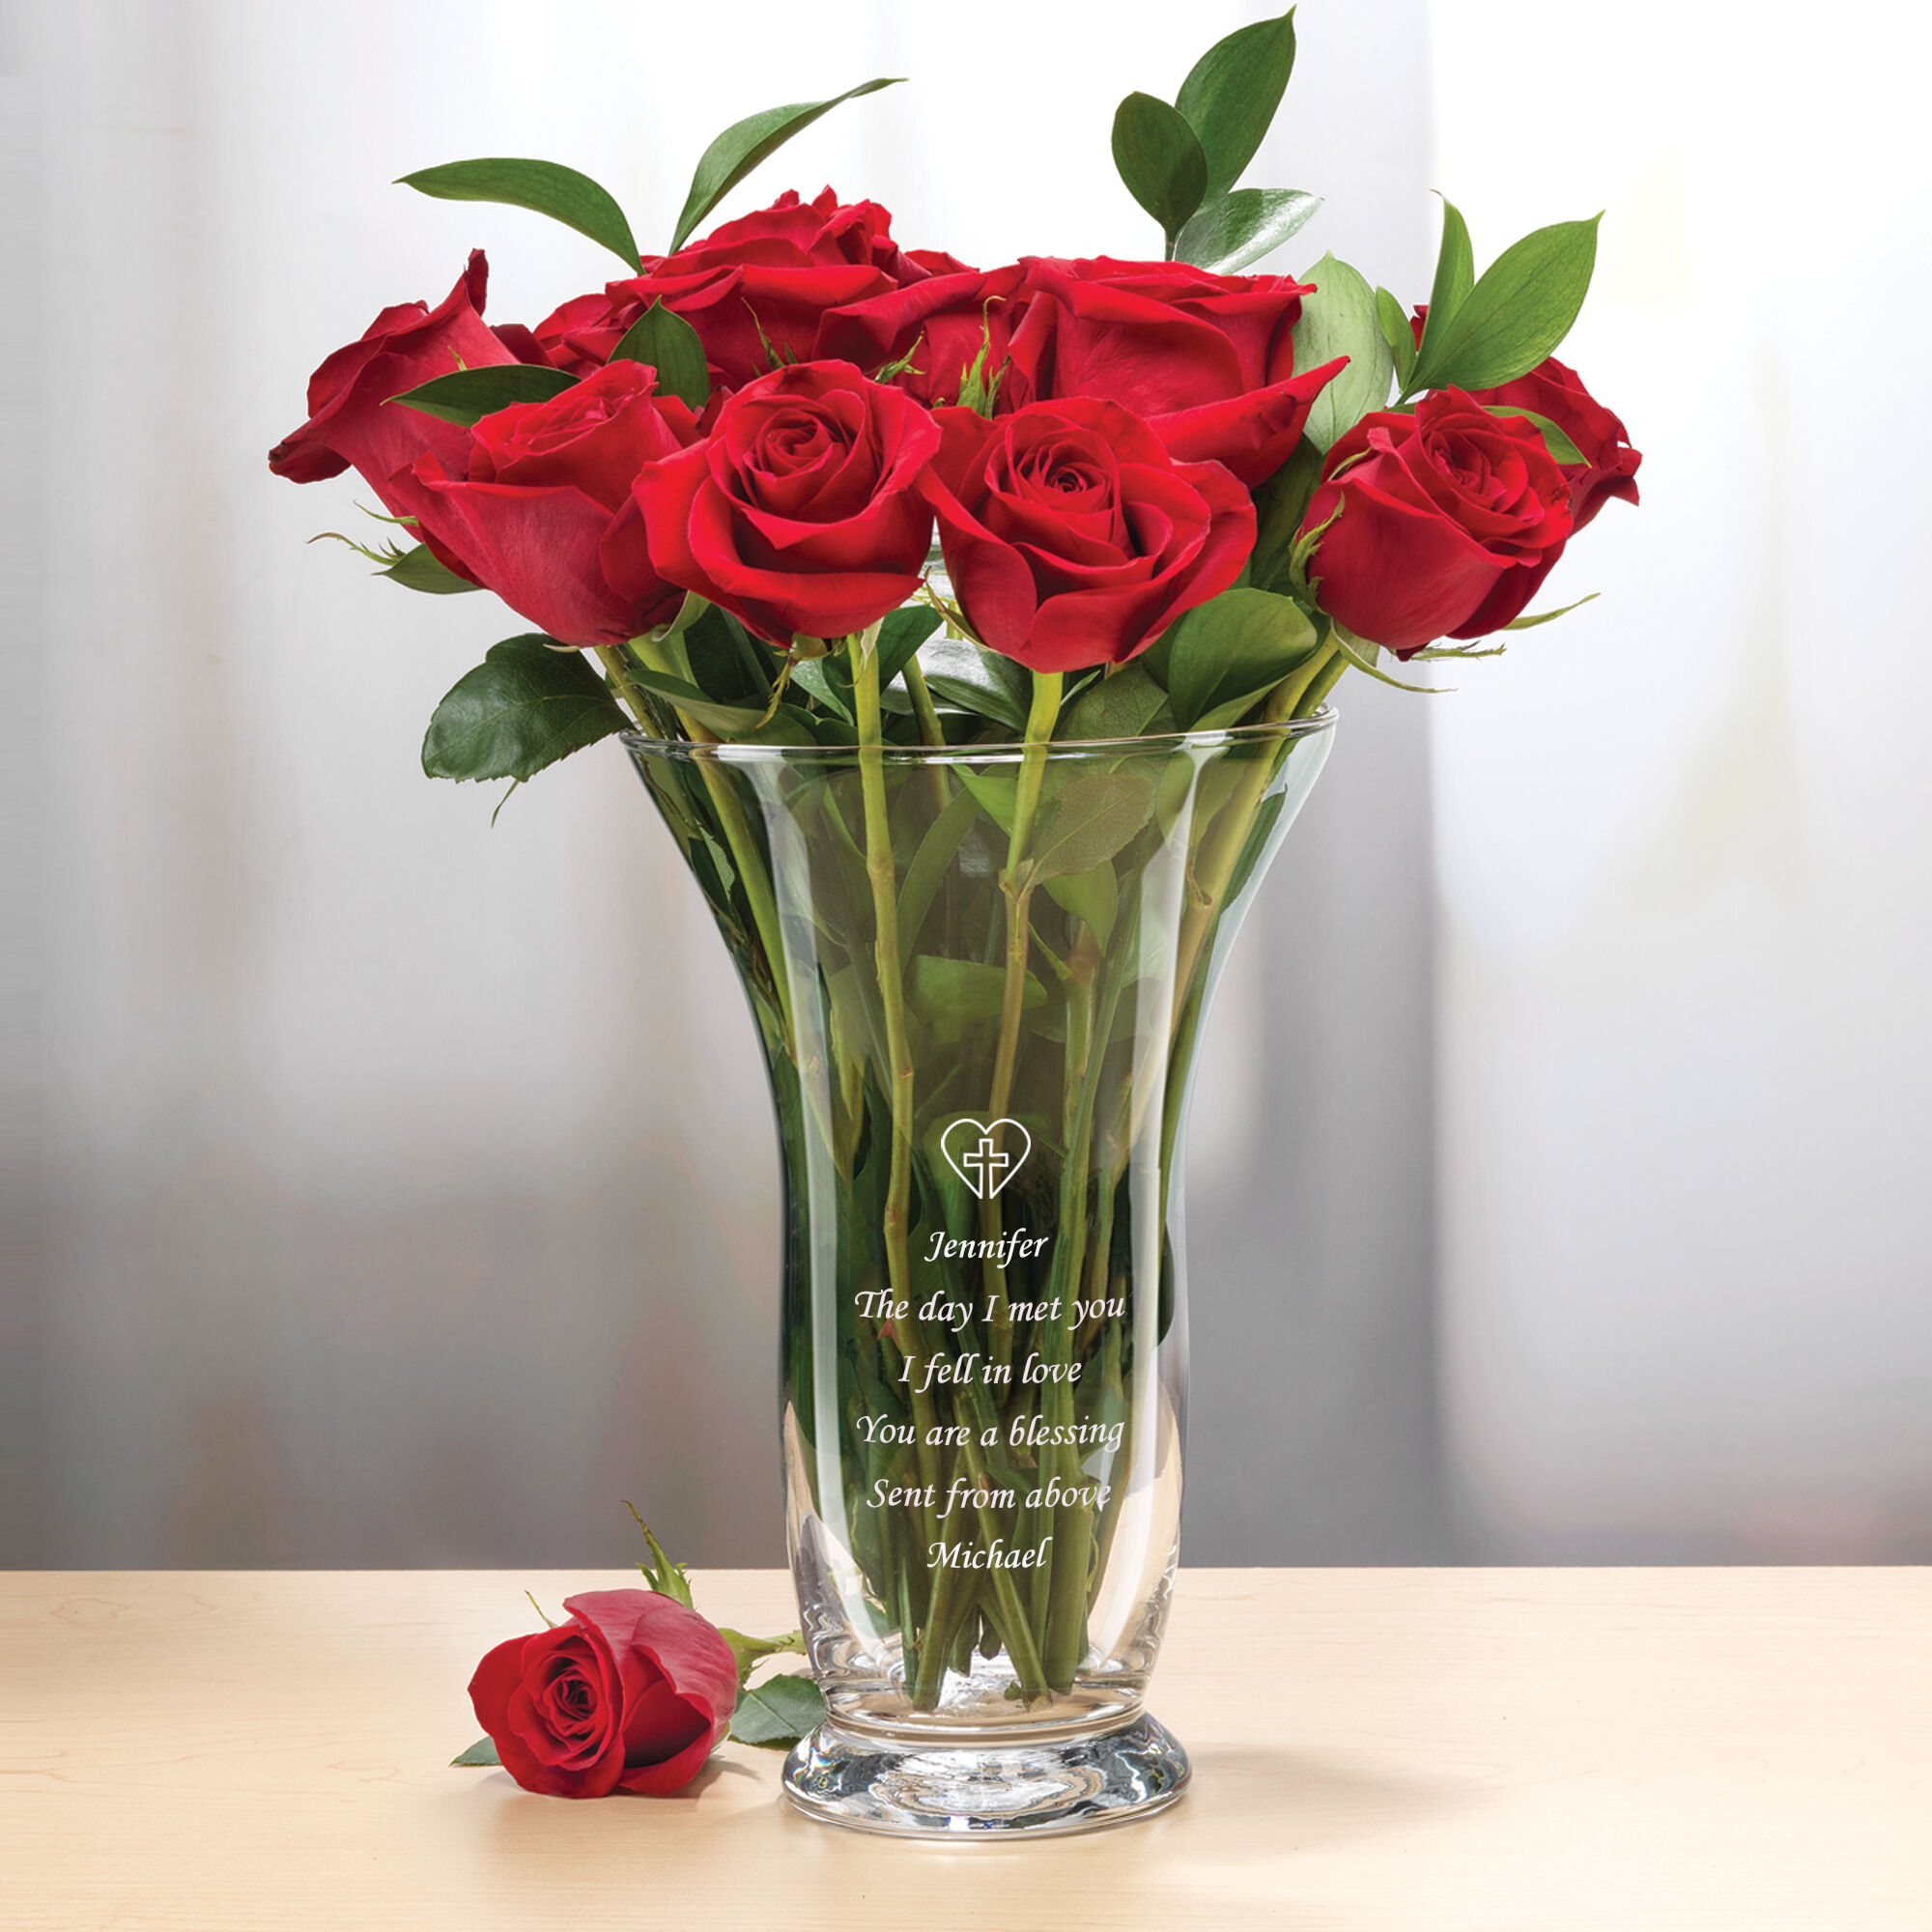 The Personalized Blessing Vase 10157 0034 b table